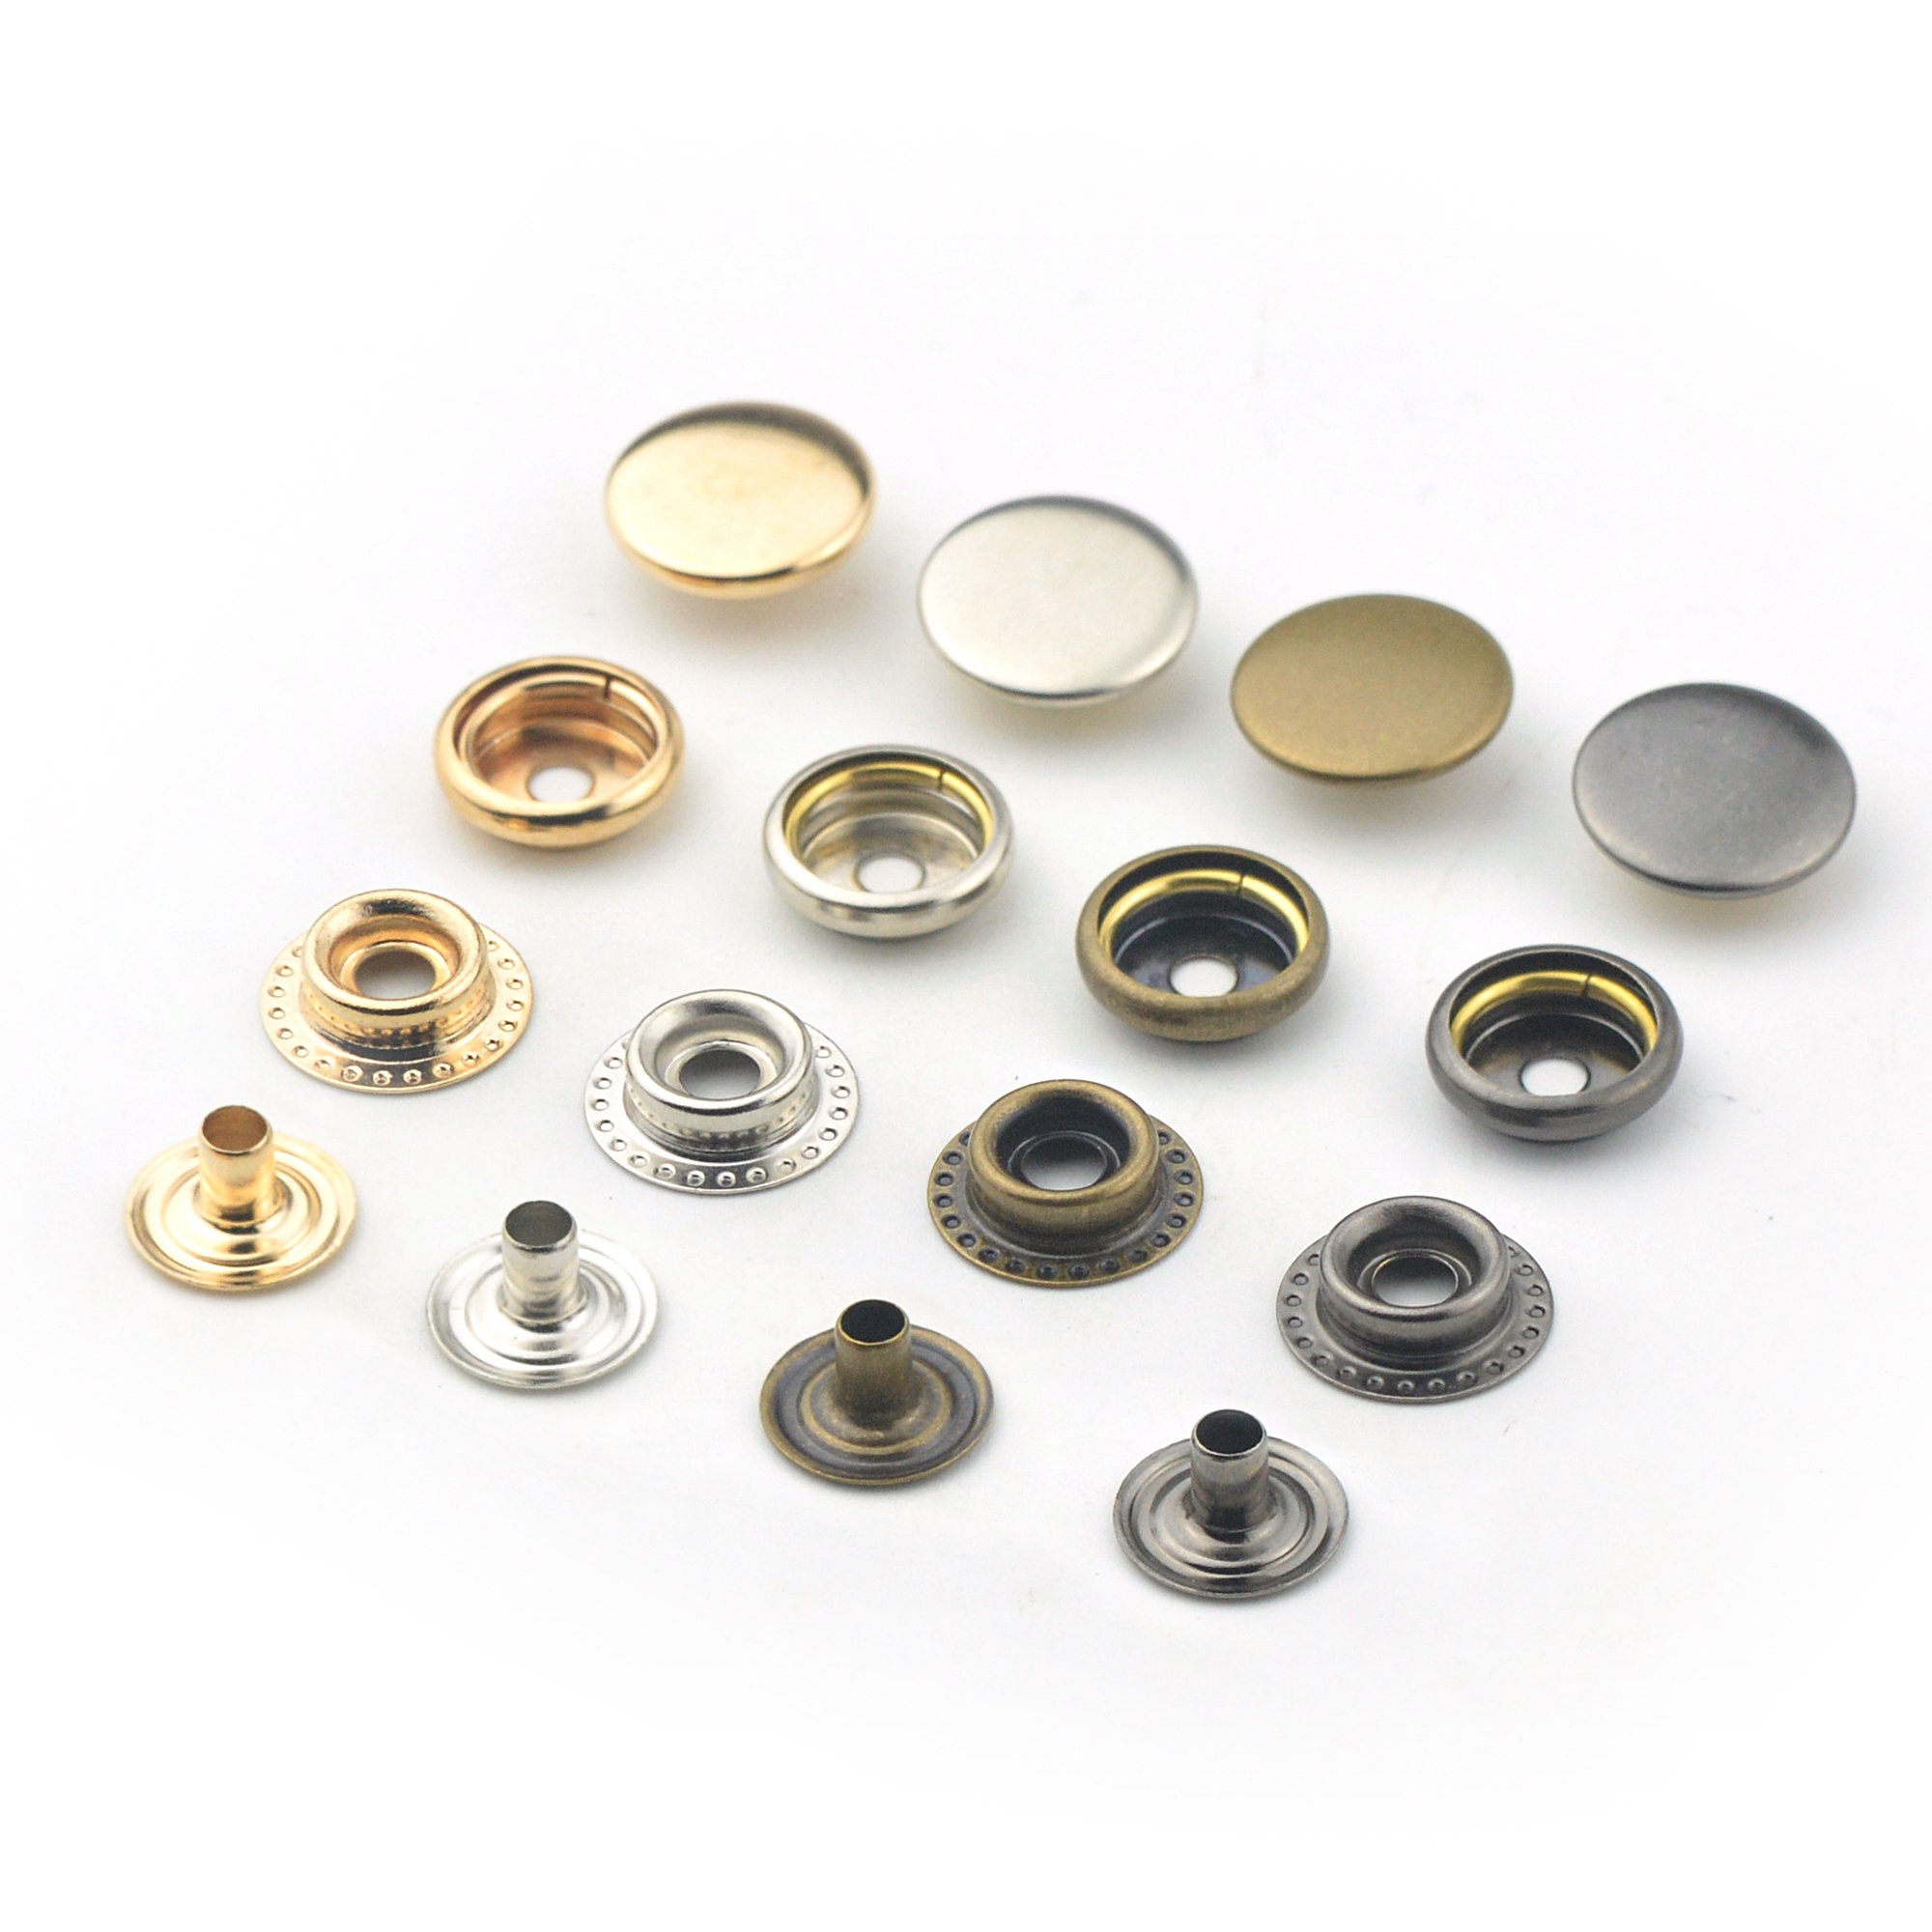 Wefab Press Buttons Push Button 200 Pcs (snap Fasteners) Studs Popper  Button - Bra, Buttons, Brass Rust Proof Superior Guide Hole For Craft And  Sewing, Prong Snap Button, रिंग स्नैप बटन 